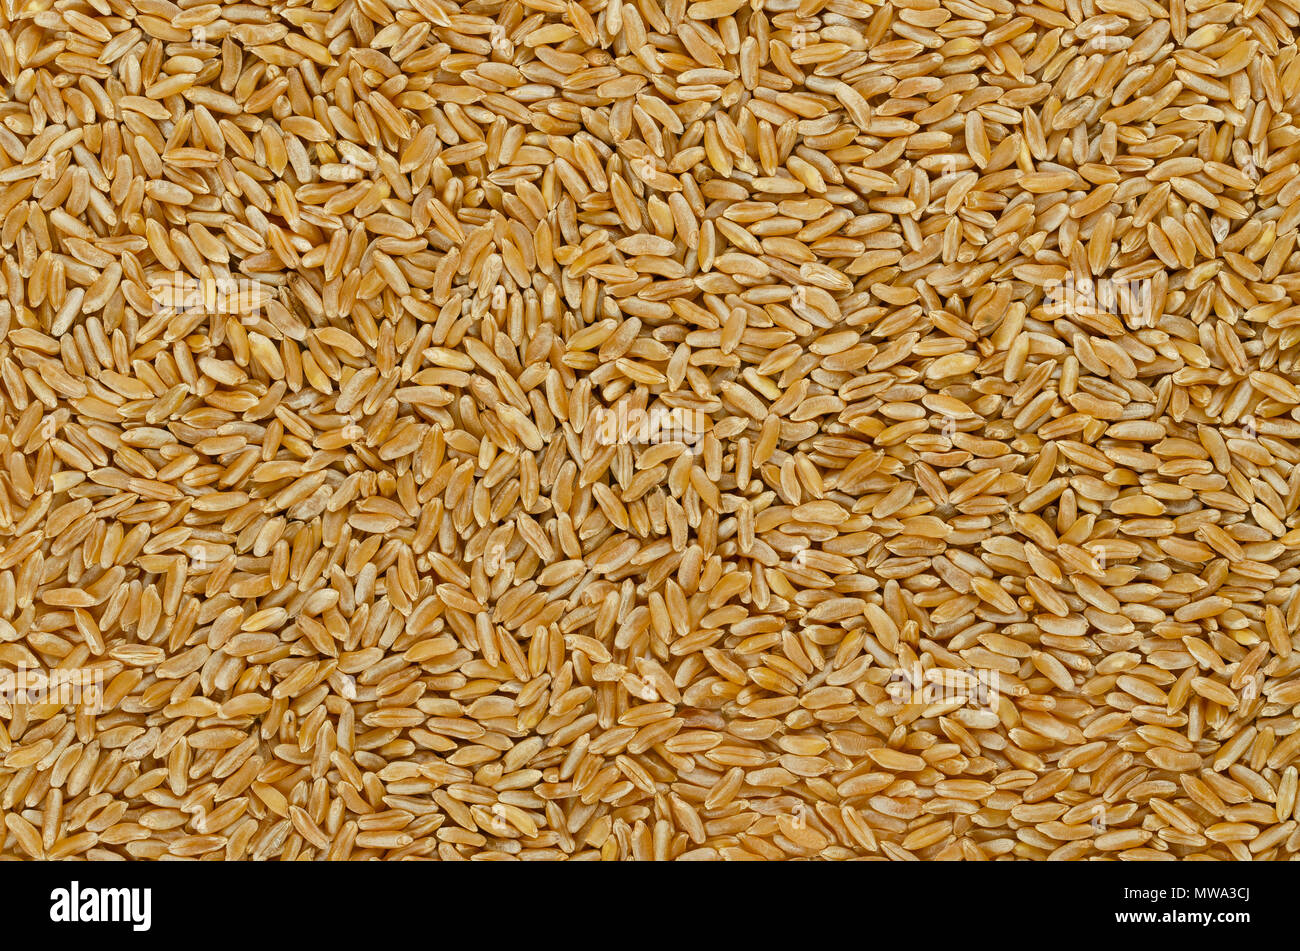 Kamut Khorasan wheat, surface and background. Grains of Oriental wheat, Triticum turanicum. Ancient recultivated grain from modern day Iran region. Stock Photo